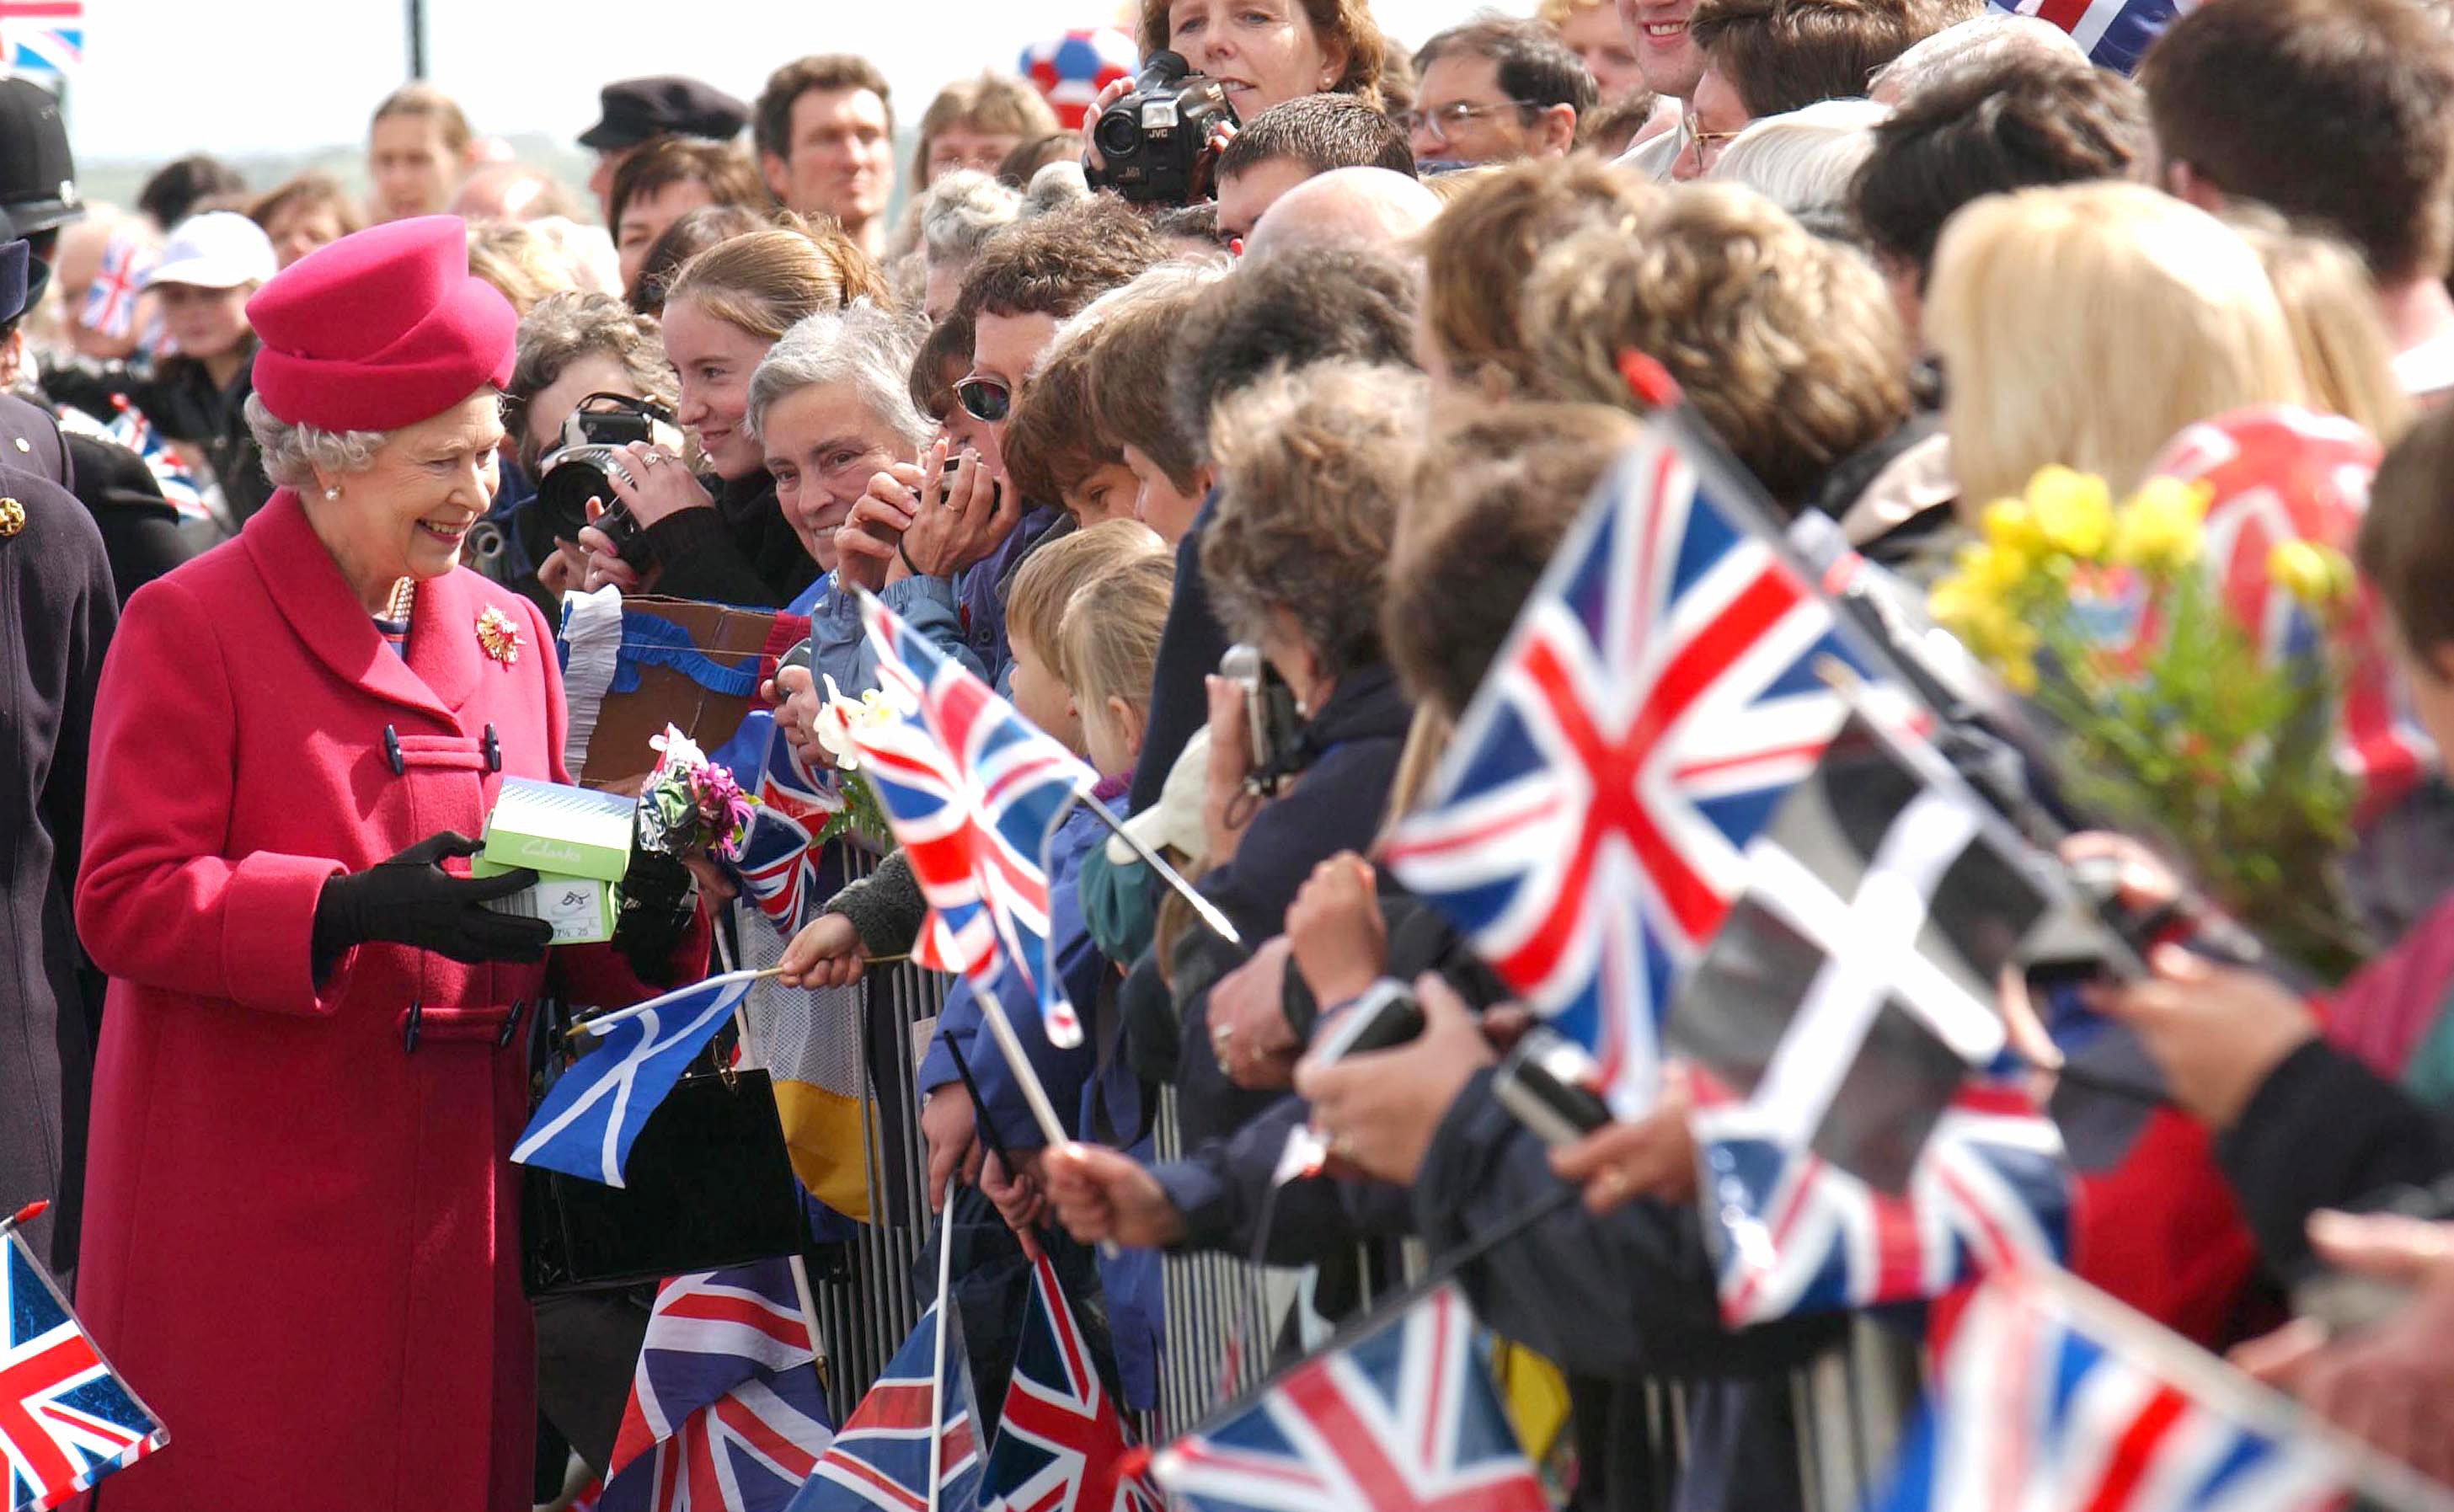 Queen Elizabeth II shaking hands and receiving gifts with a crowd of people in the stands